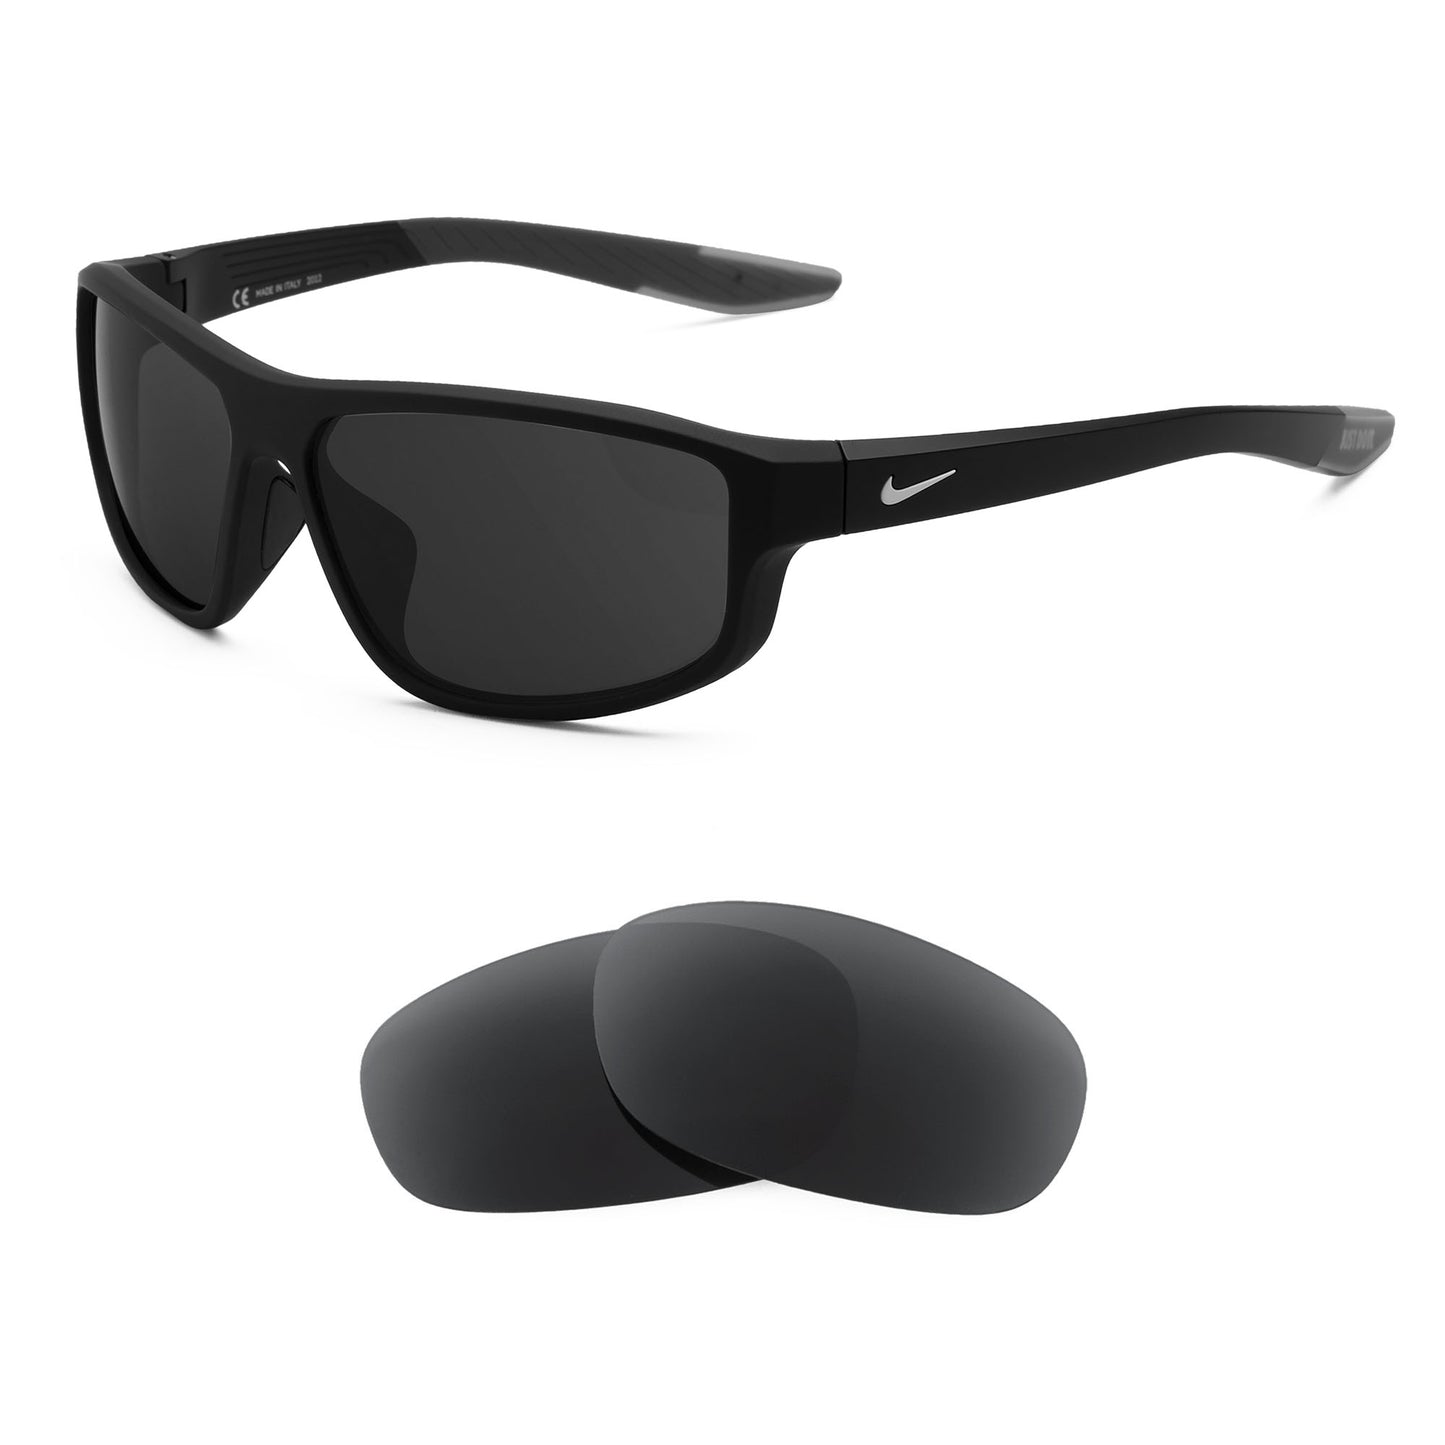 Nike Brazen Fuel sunglasses with replacement lenses